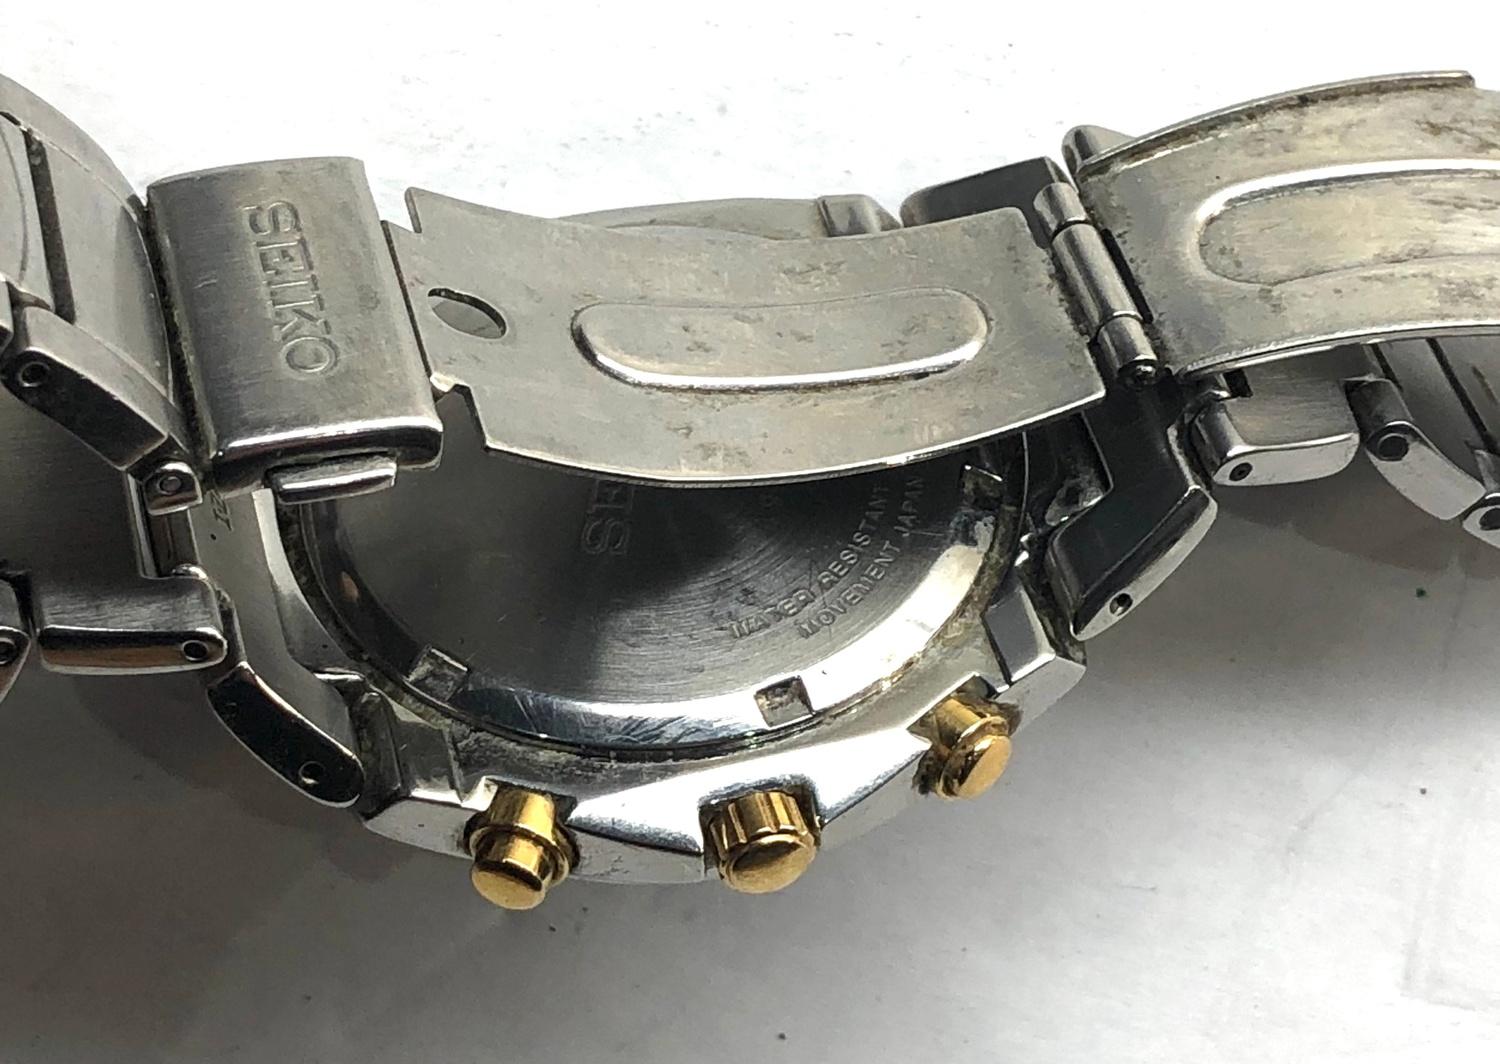 Gents Seiko chronograph 100m 7t62 oeeo quartz working order but no warranty given - Image 4 of 4